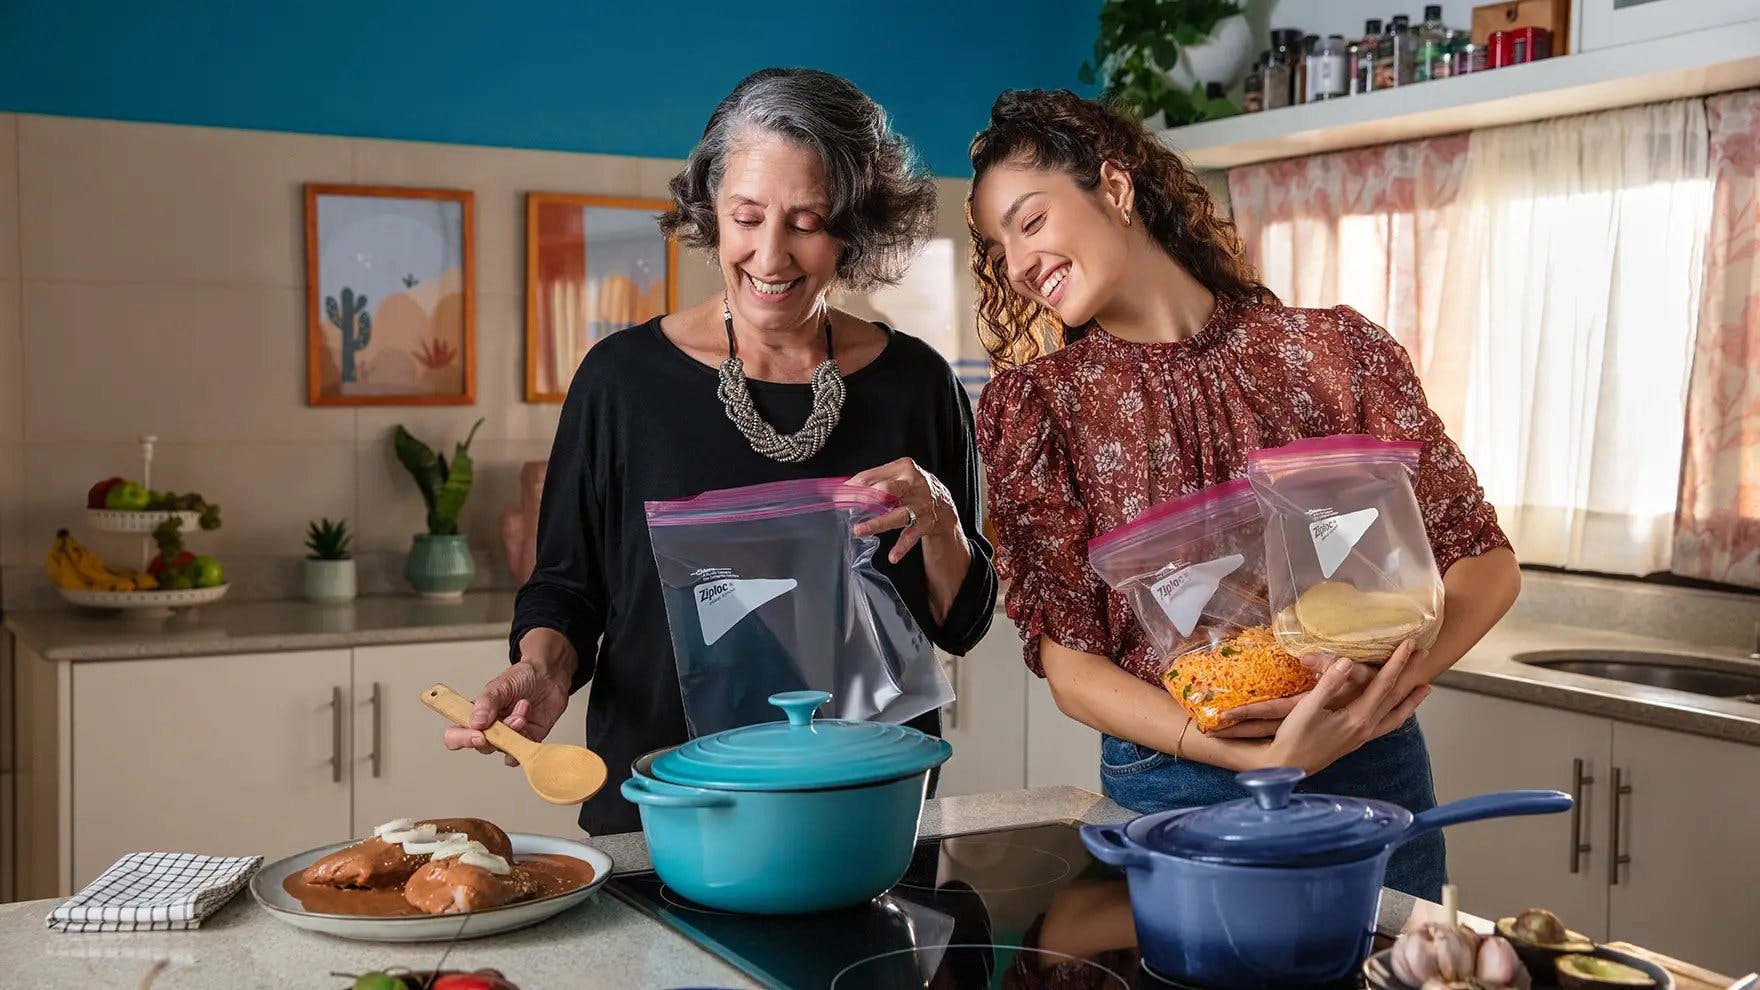 Two women in kitchen adding food into Ziploc® bags